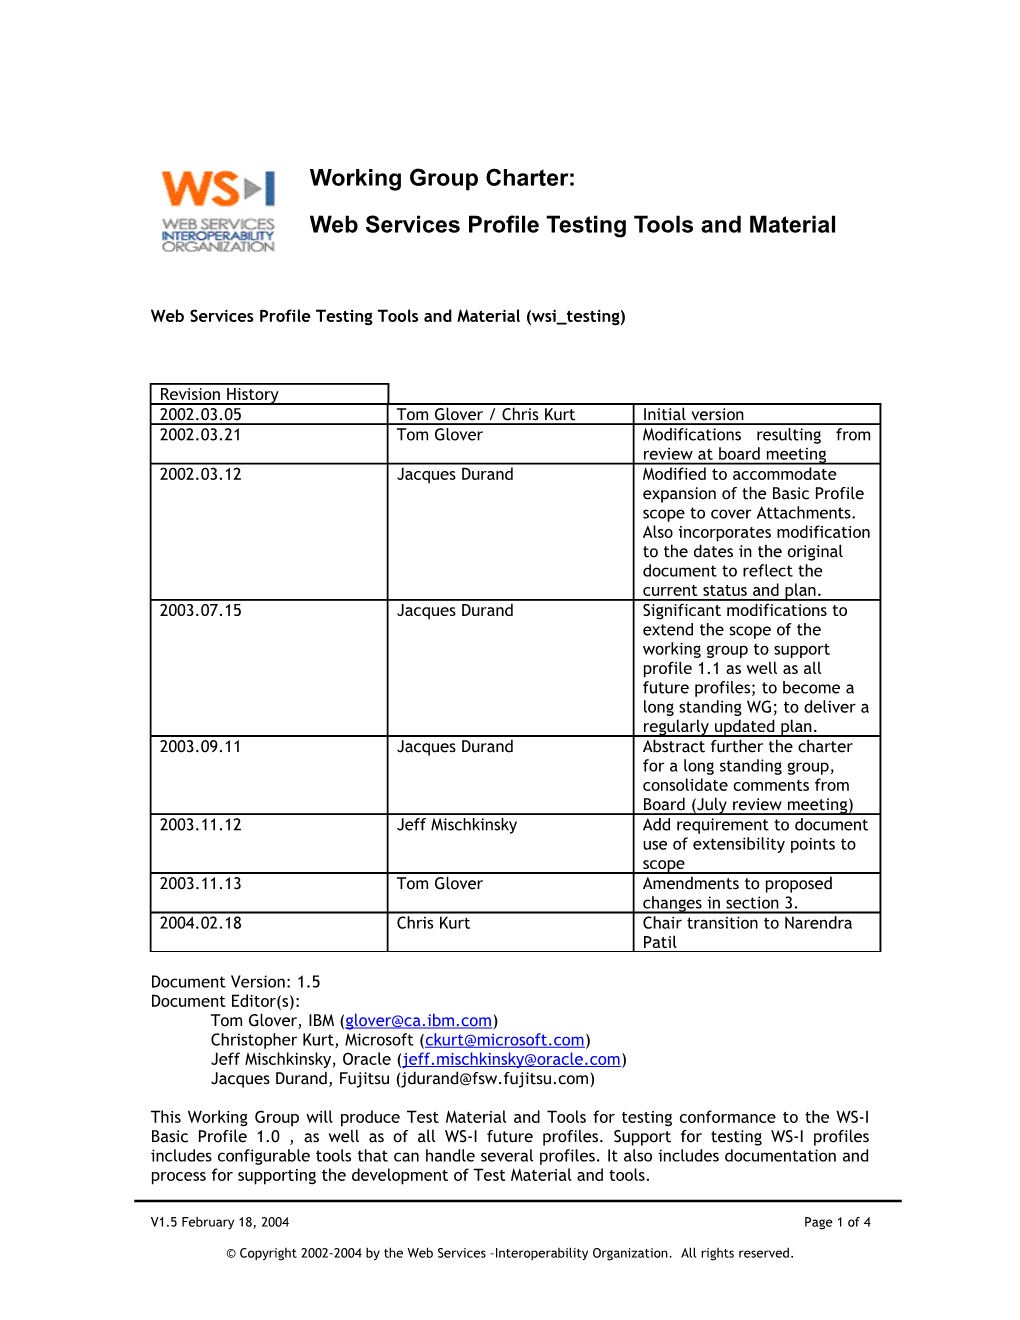 WS-I Test Working Group Charter